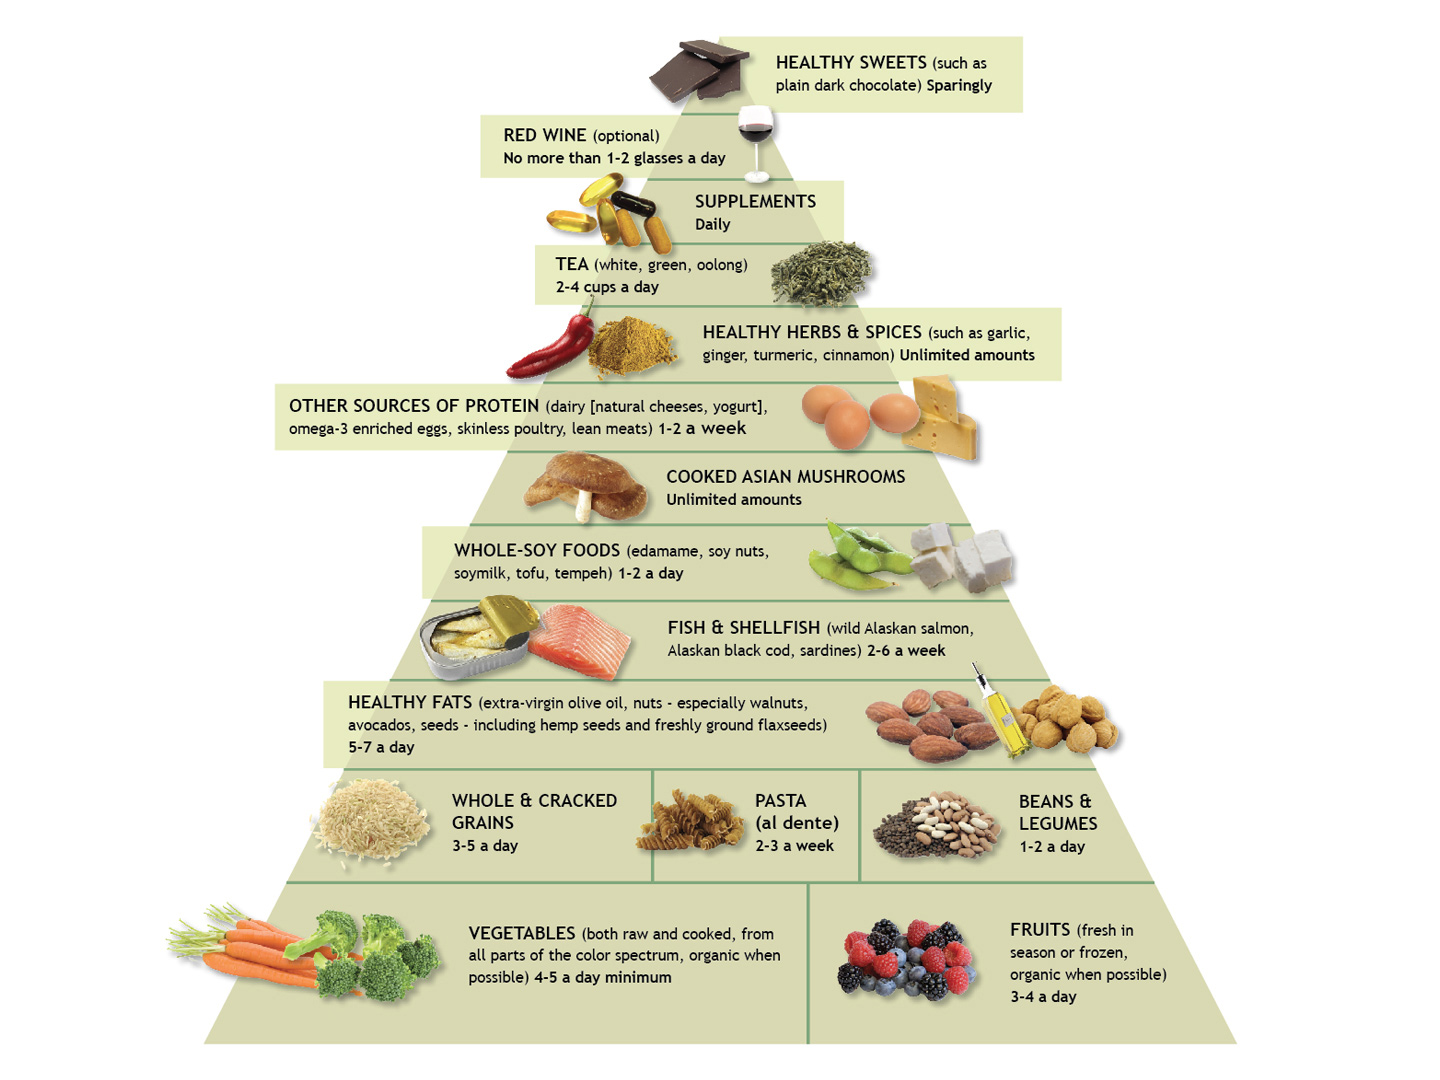 The Anti Inflammatory Diet Food Pyramid Andrew Weil M D